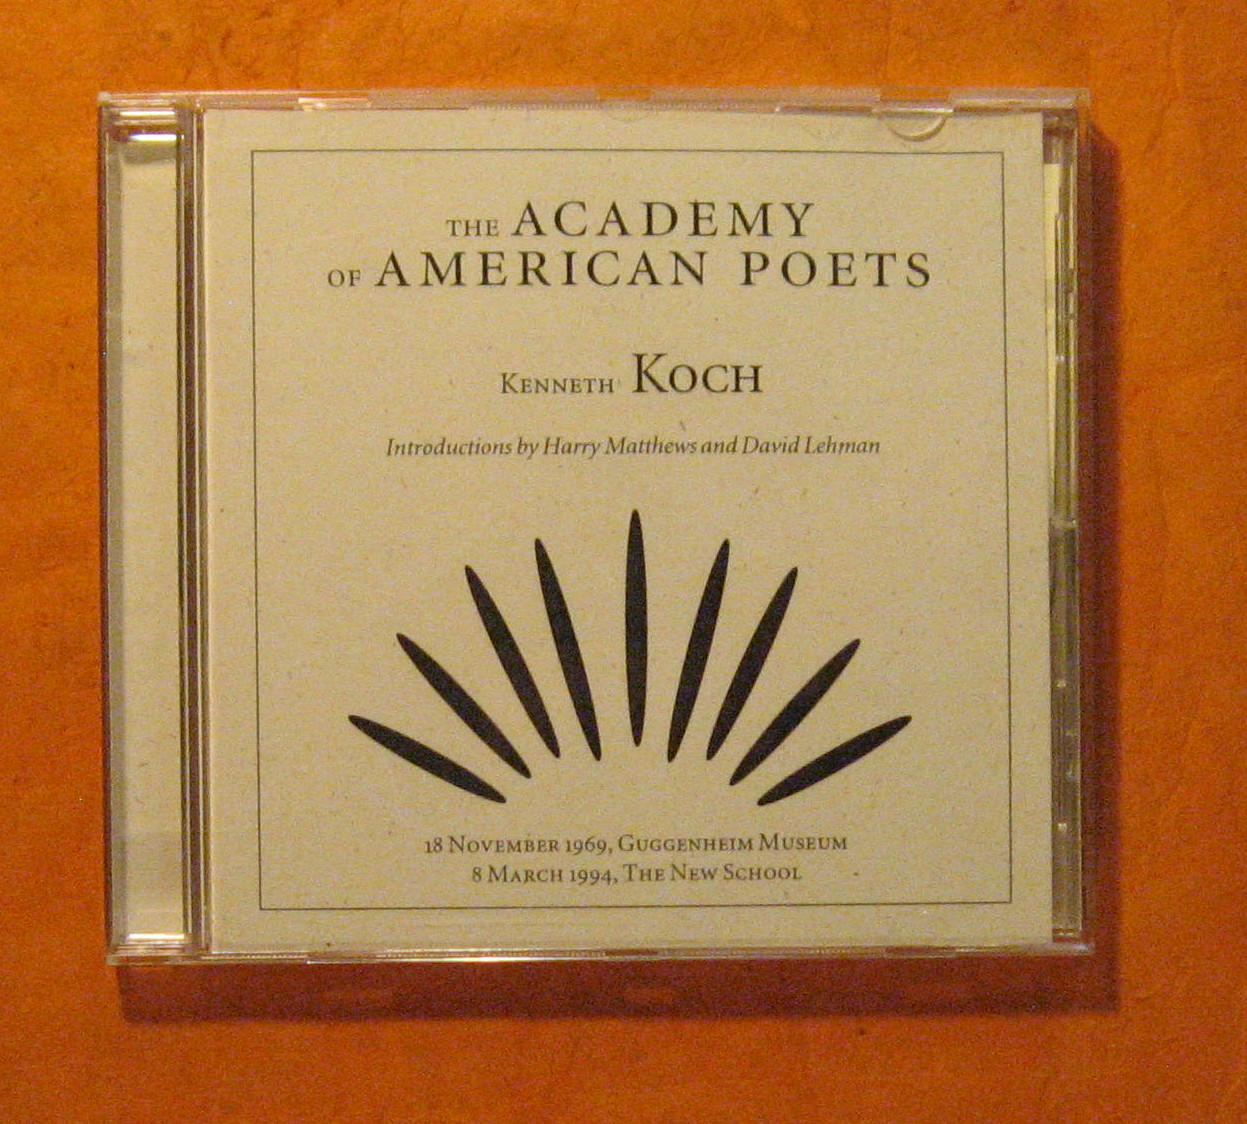 Image for Kenneth Koch [The Academy of American Poets Audio CD]